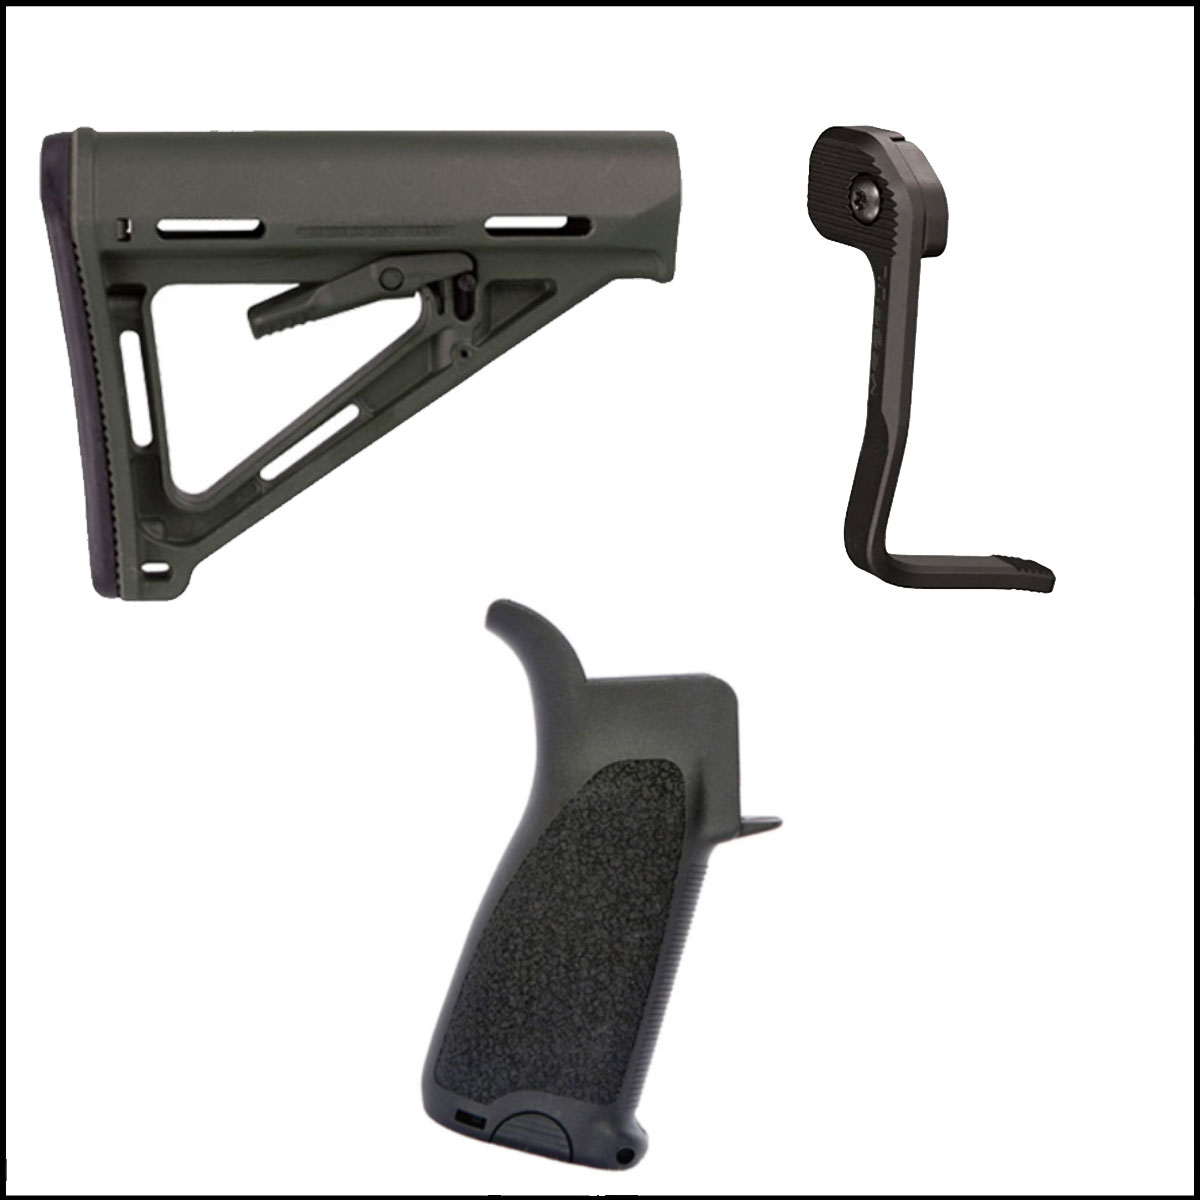 Furniture Kit: Magpul MOE Mil-Spec Collapsible AR-15 Carbine Synthetic Buttstock + BCM Gunfighter Black Mod 3 Grip + Magpul BAD Lever Extended Bolt Catch